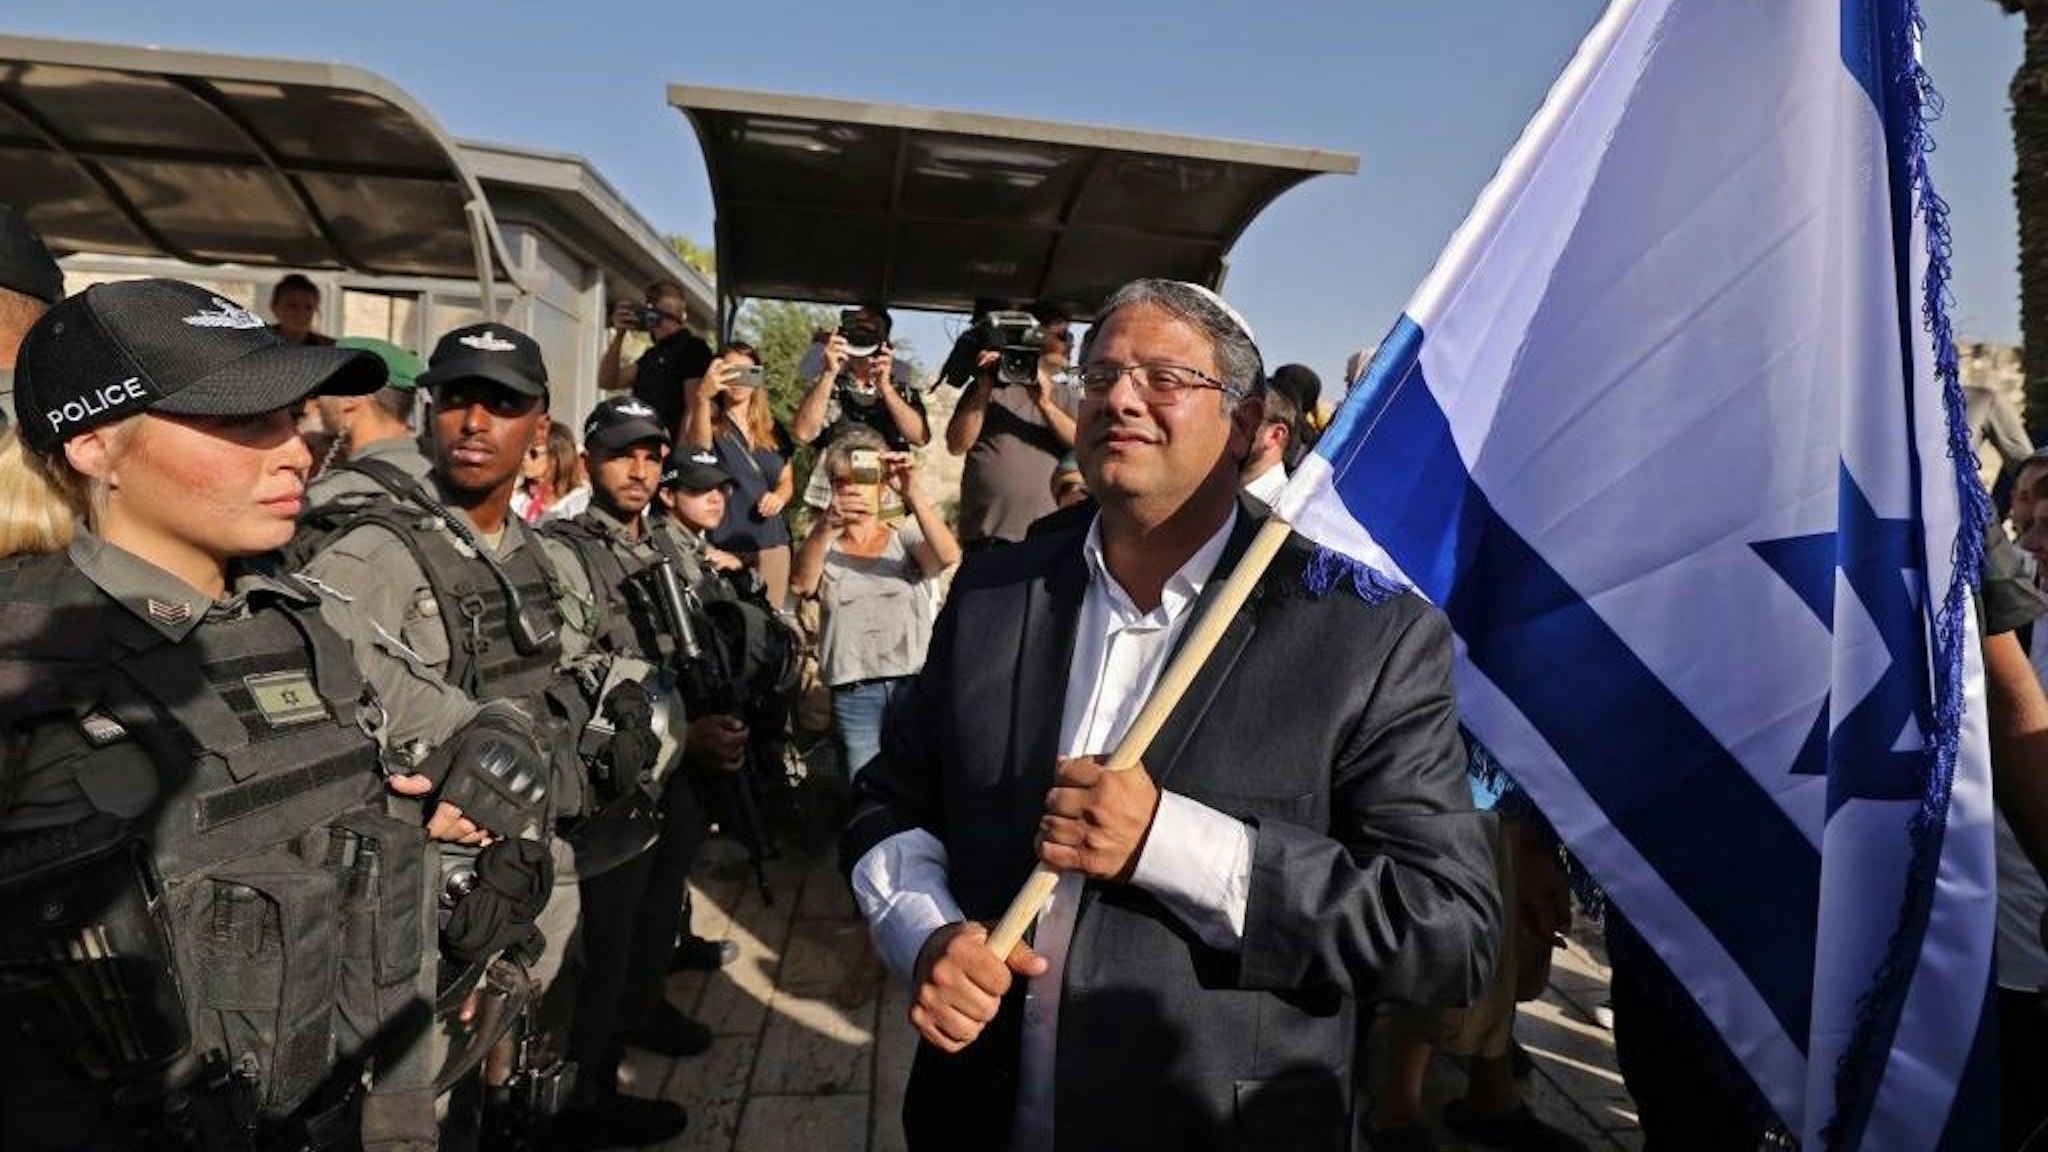 Itamar Ben-Gvir, member of Israel's Knesset (parliament) and head of the one-man far right "Jewish Power" (Otzma Yehudit) party, waves an Israeli flag as he attempts to march to Damascus Gate in east Jerusalem, on June 10, 2021. (Photo by EMMANUEL DUNAND / AFP) (Photo by EMMANUEL DUNAND/AFP via Getty Images)